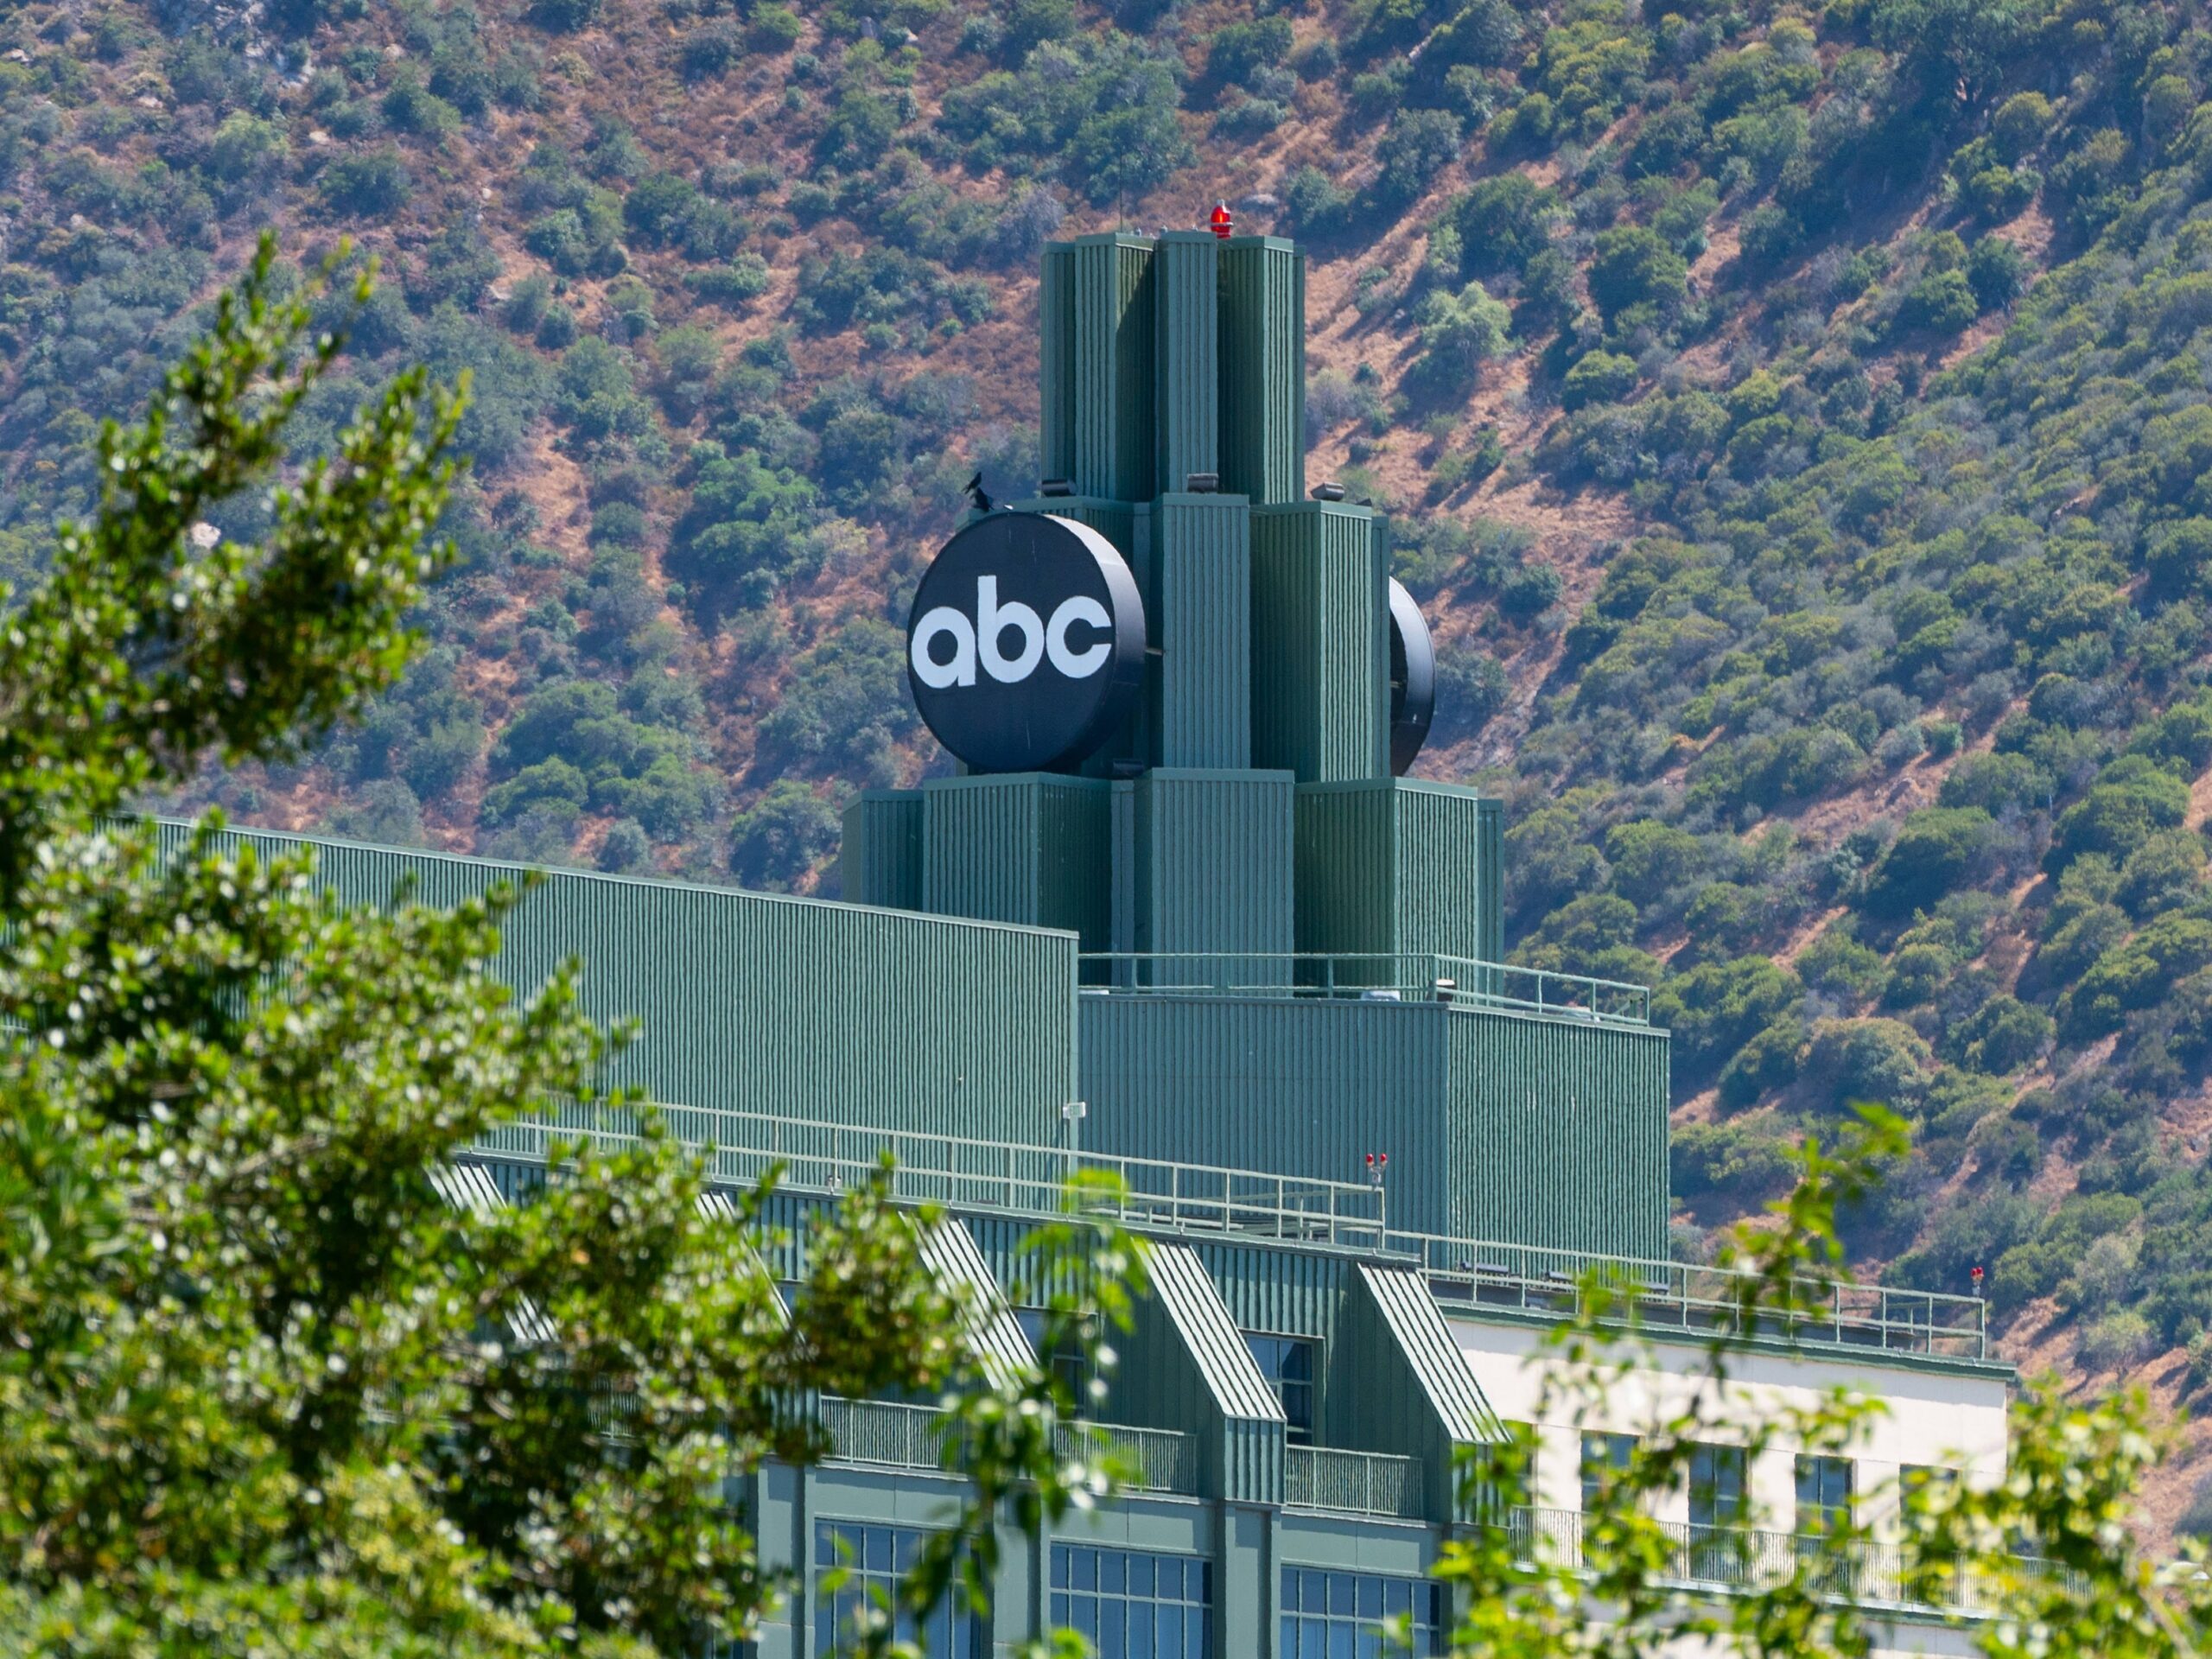 General views of ABC Television headquarters at The Walt Disney Company studio lot on June 24, 2022 in Burbank, California.